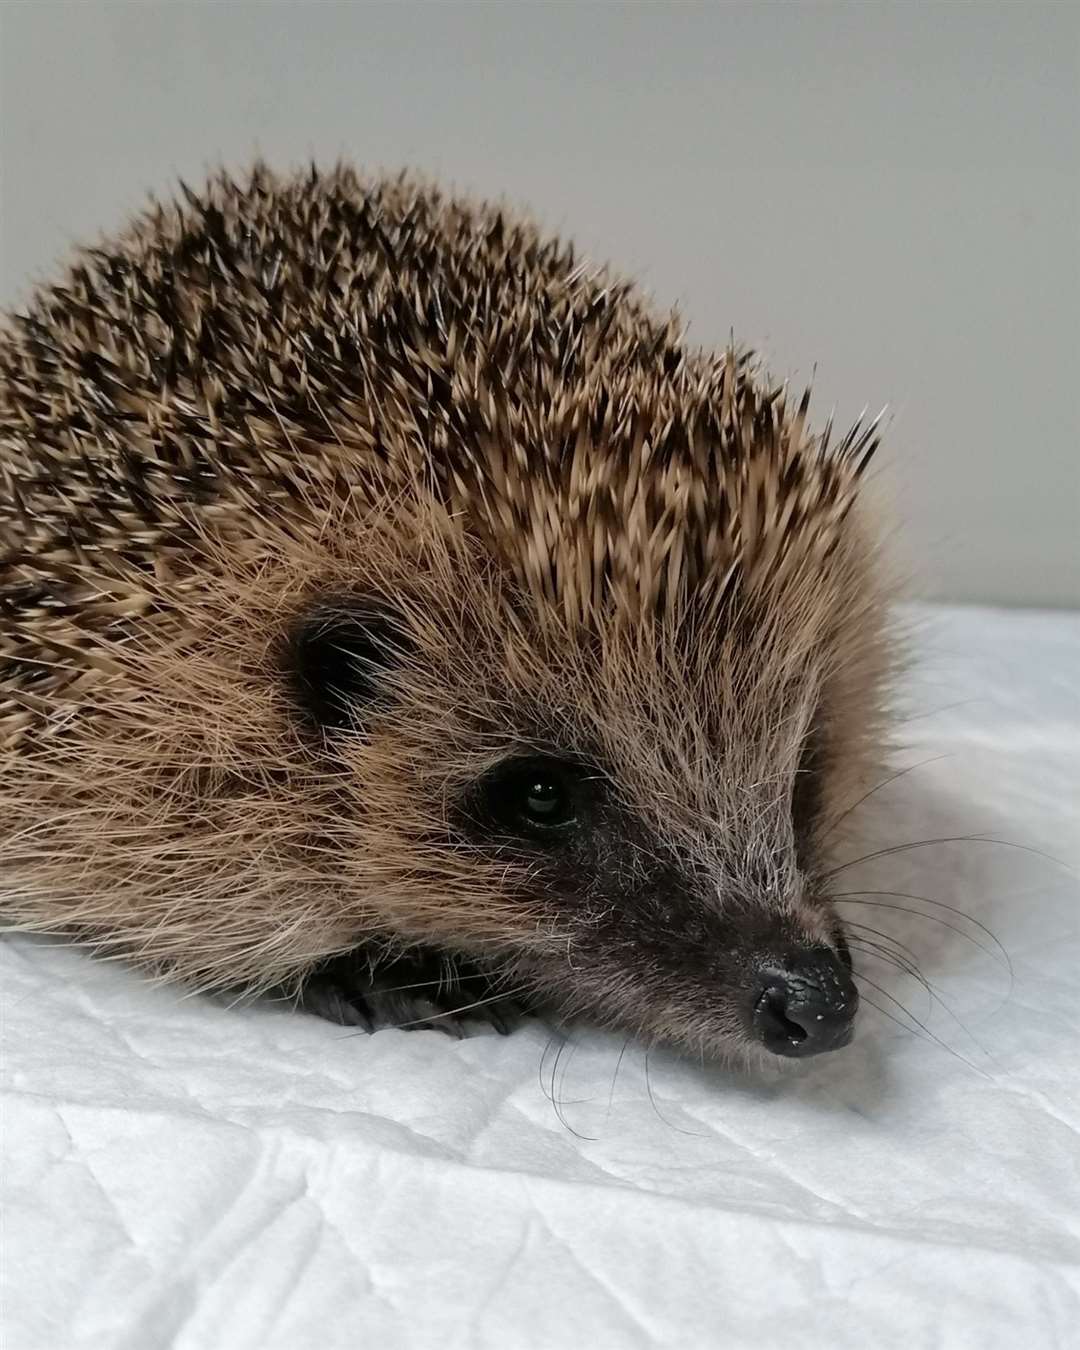 The New Arc is to start microchipping the hedgehogs it releases back into the wild.